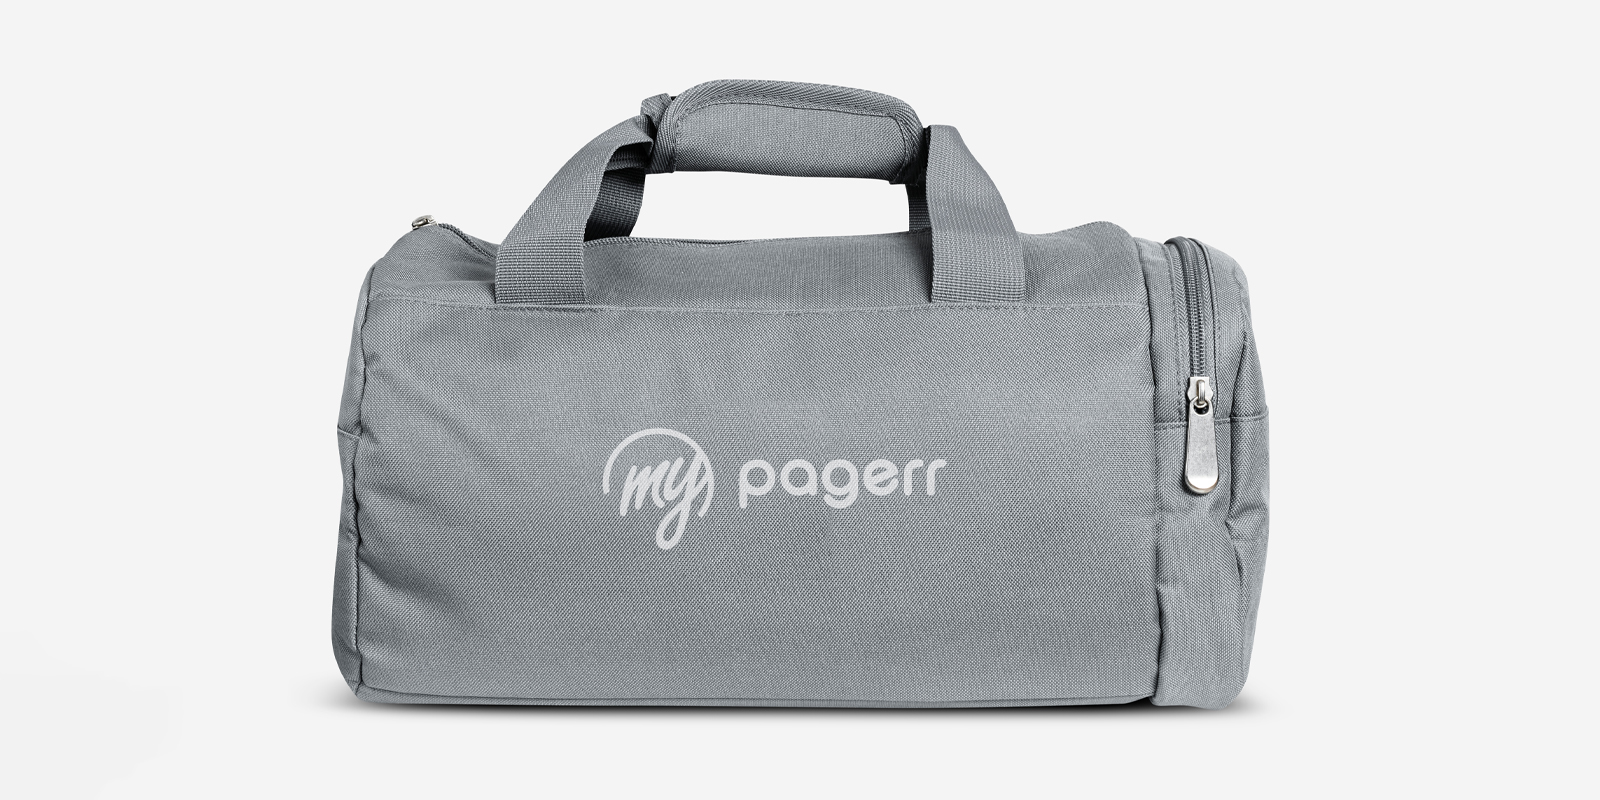 Duffel & gym bags in Adelaide - Print with Pagerr